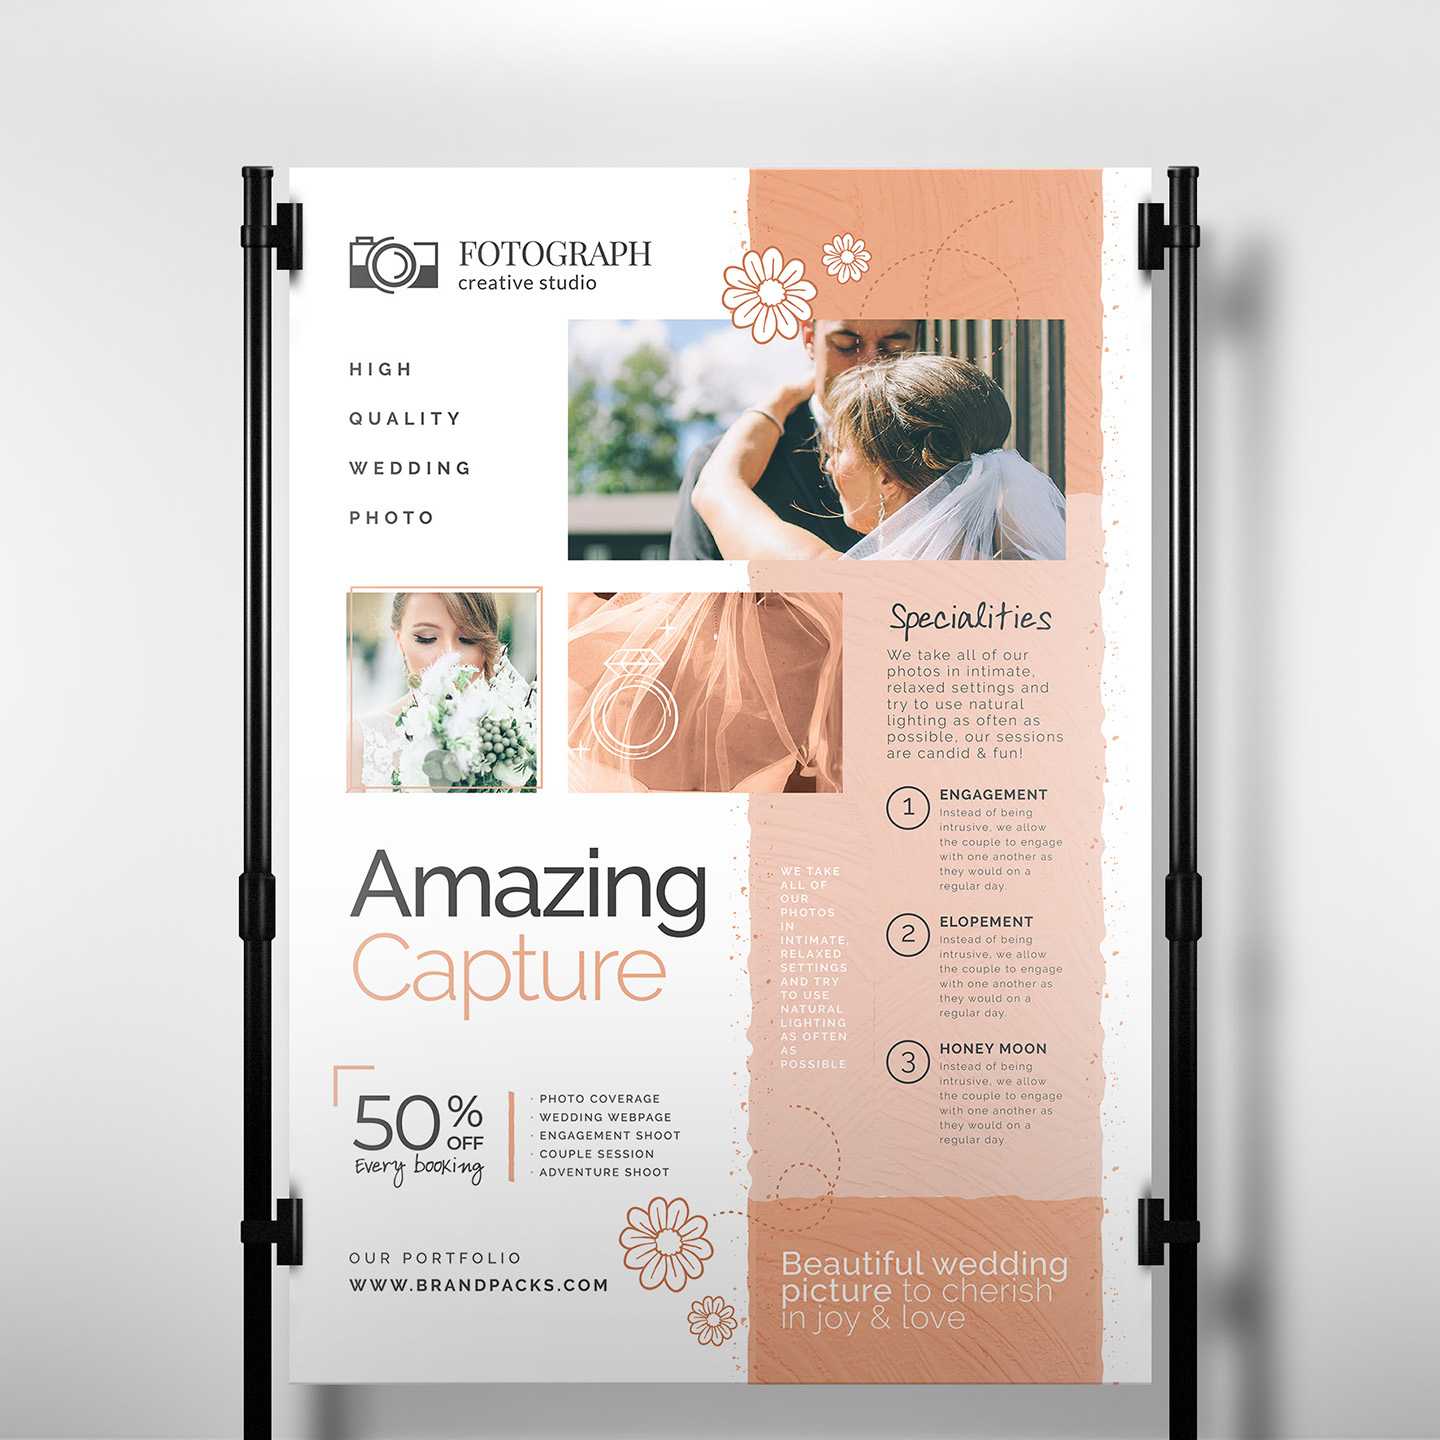 Photography Service Banner Template - Psd, Ai & Vector For Photography Banner Template